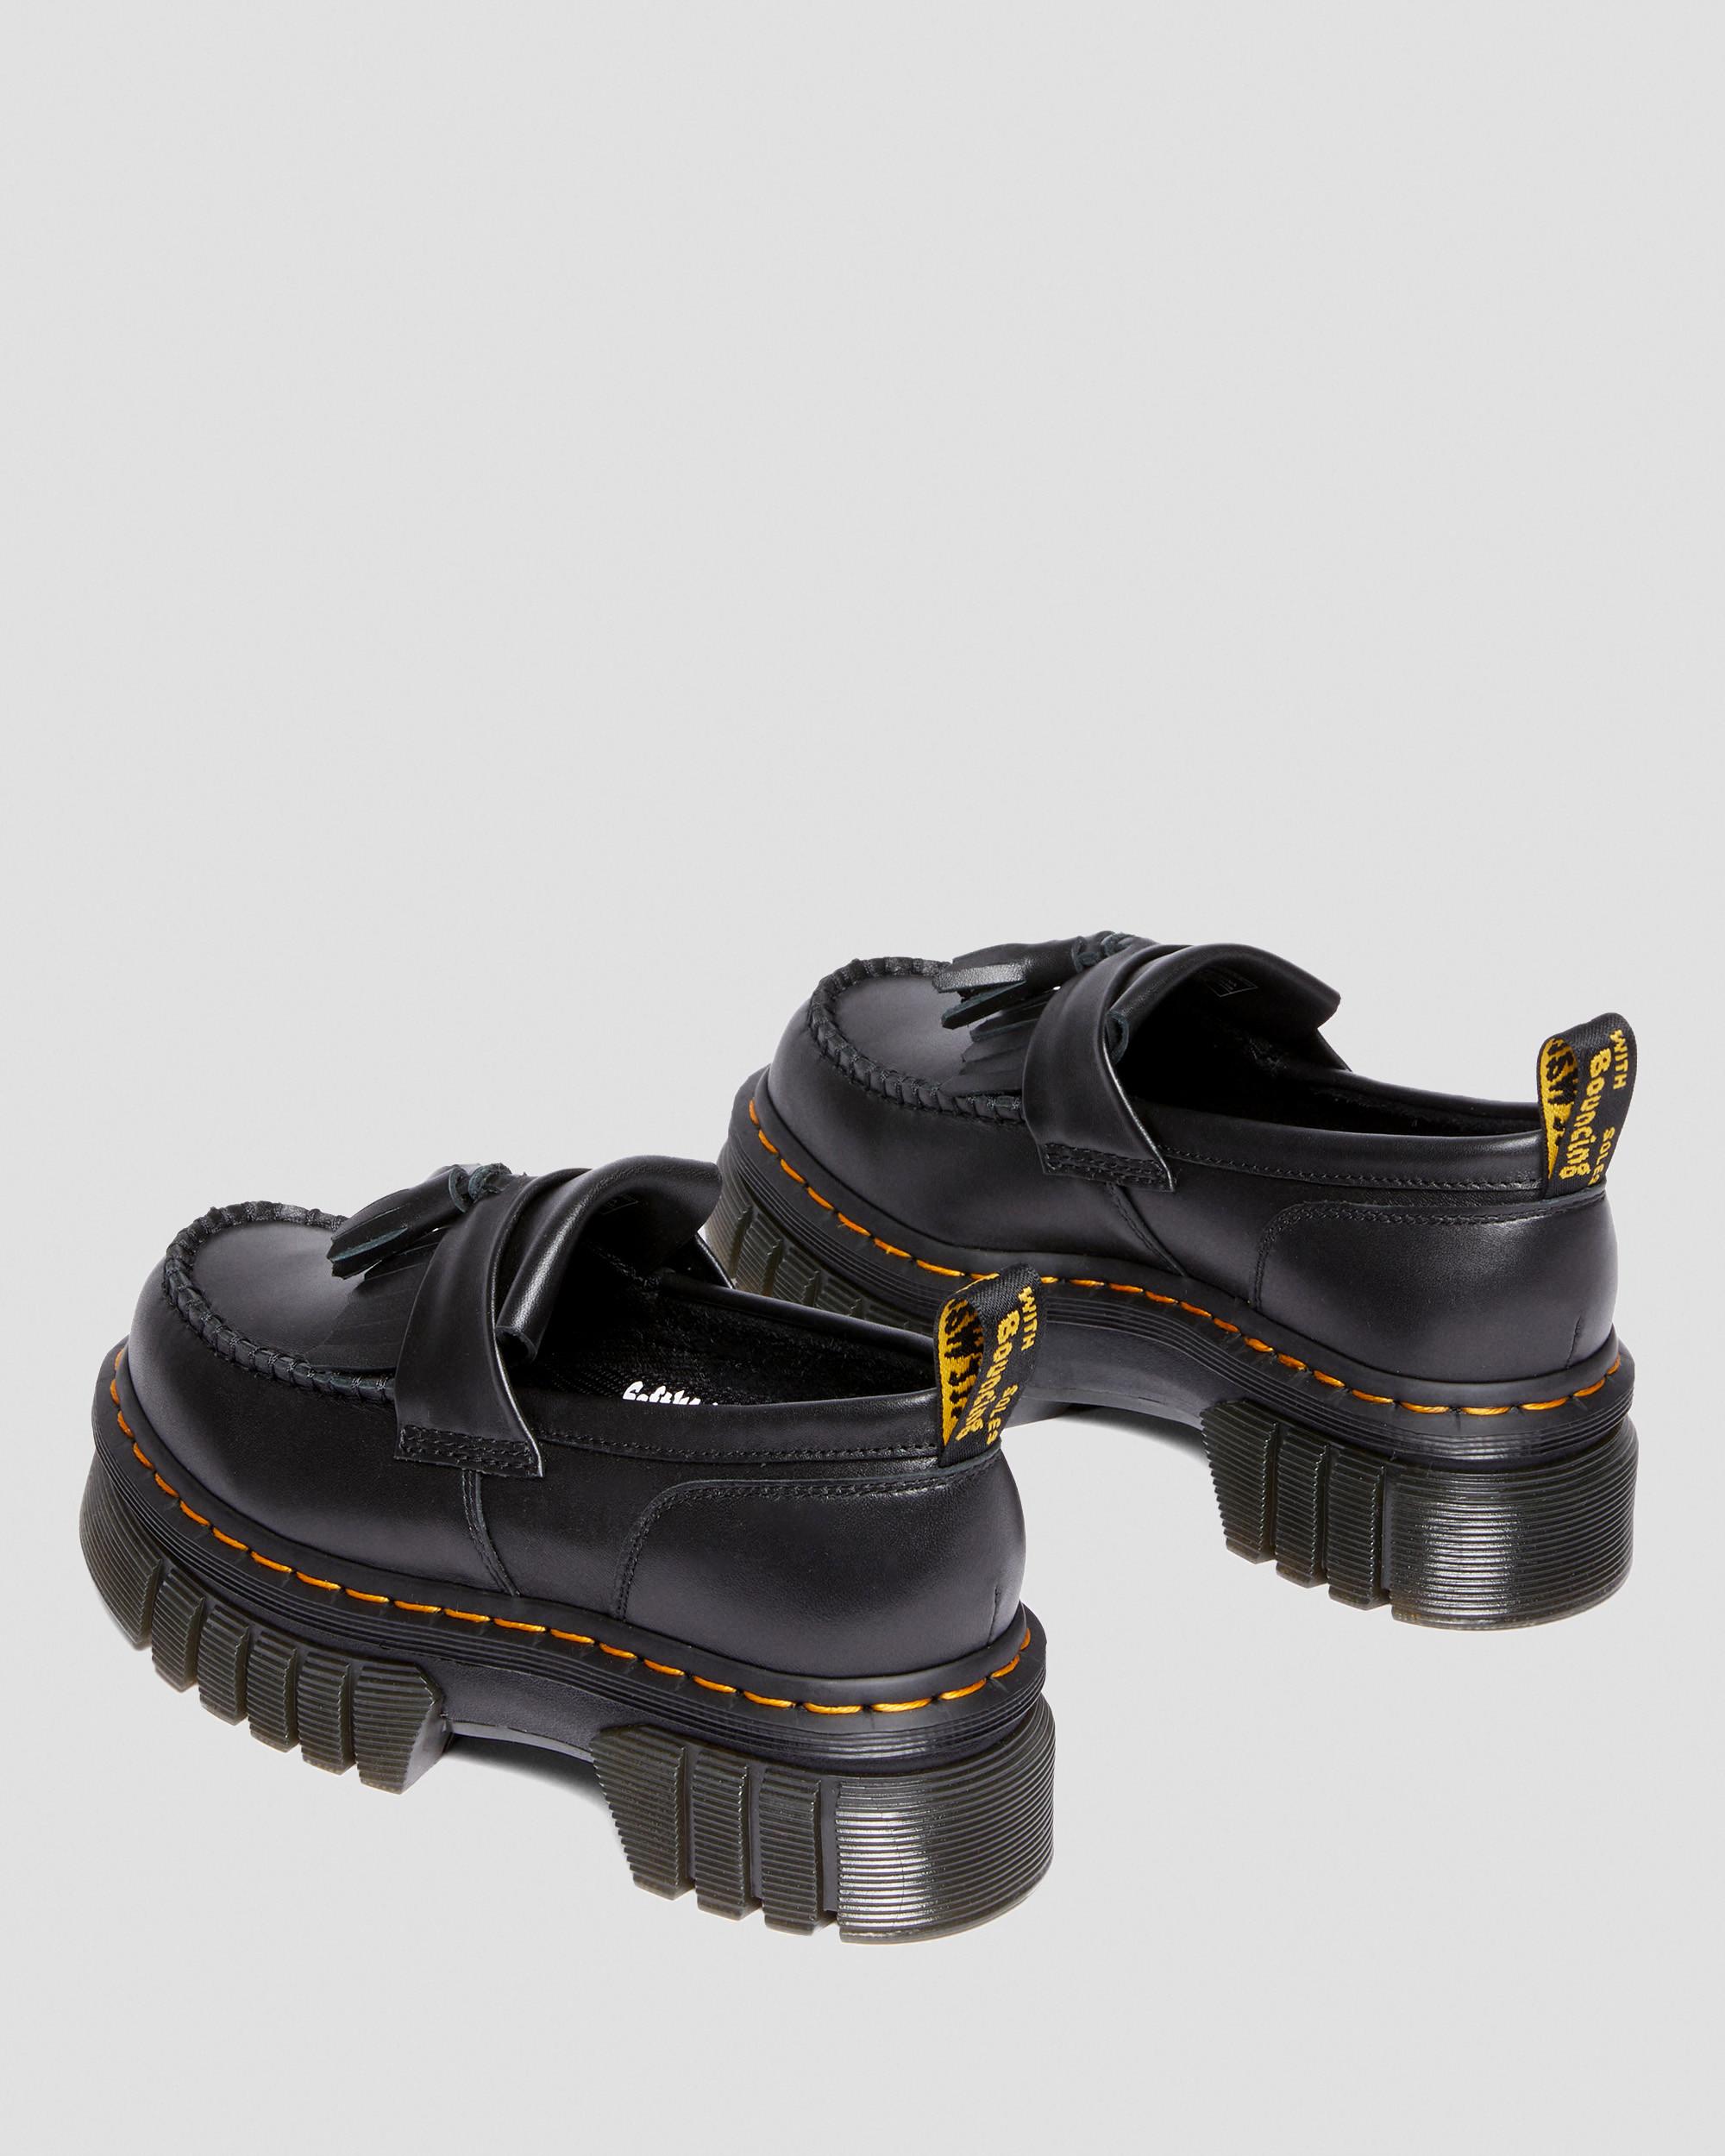 Audrick Nappa Lux Platform Loafers in Black